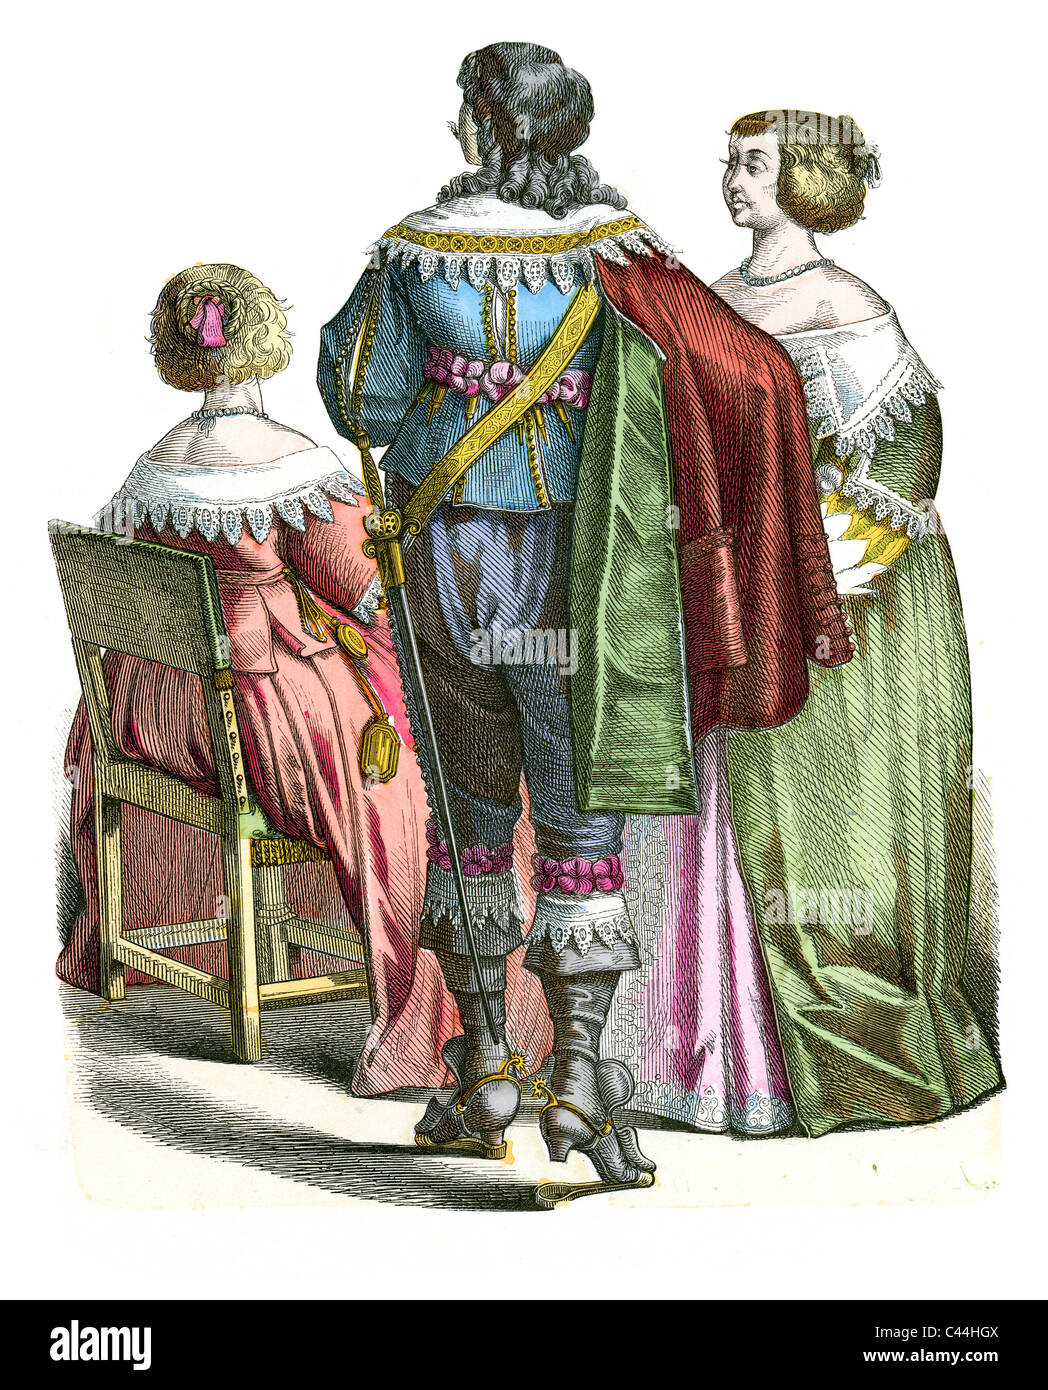 A nobleman and women in the period costume of 17th Century France Stock Photo